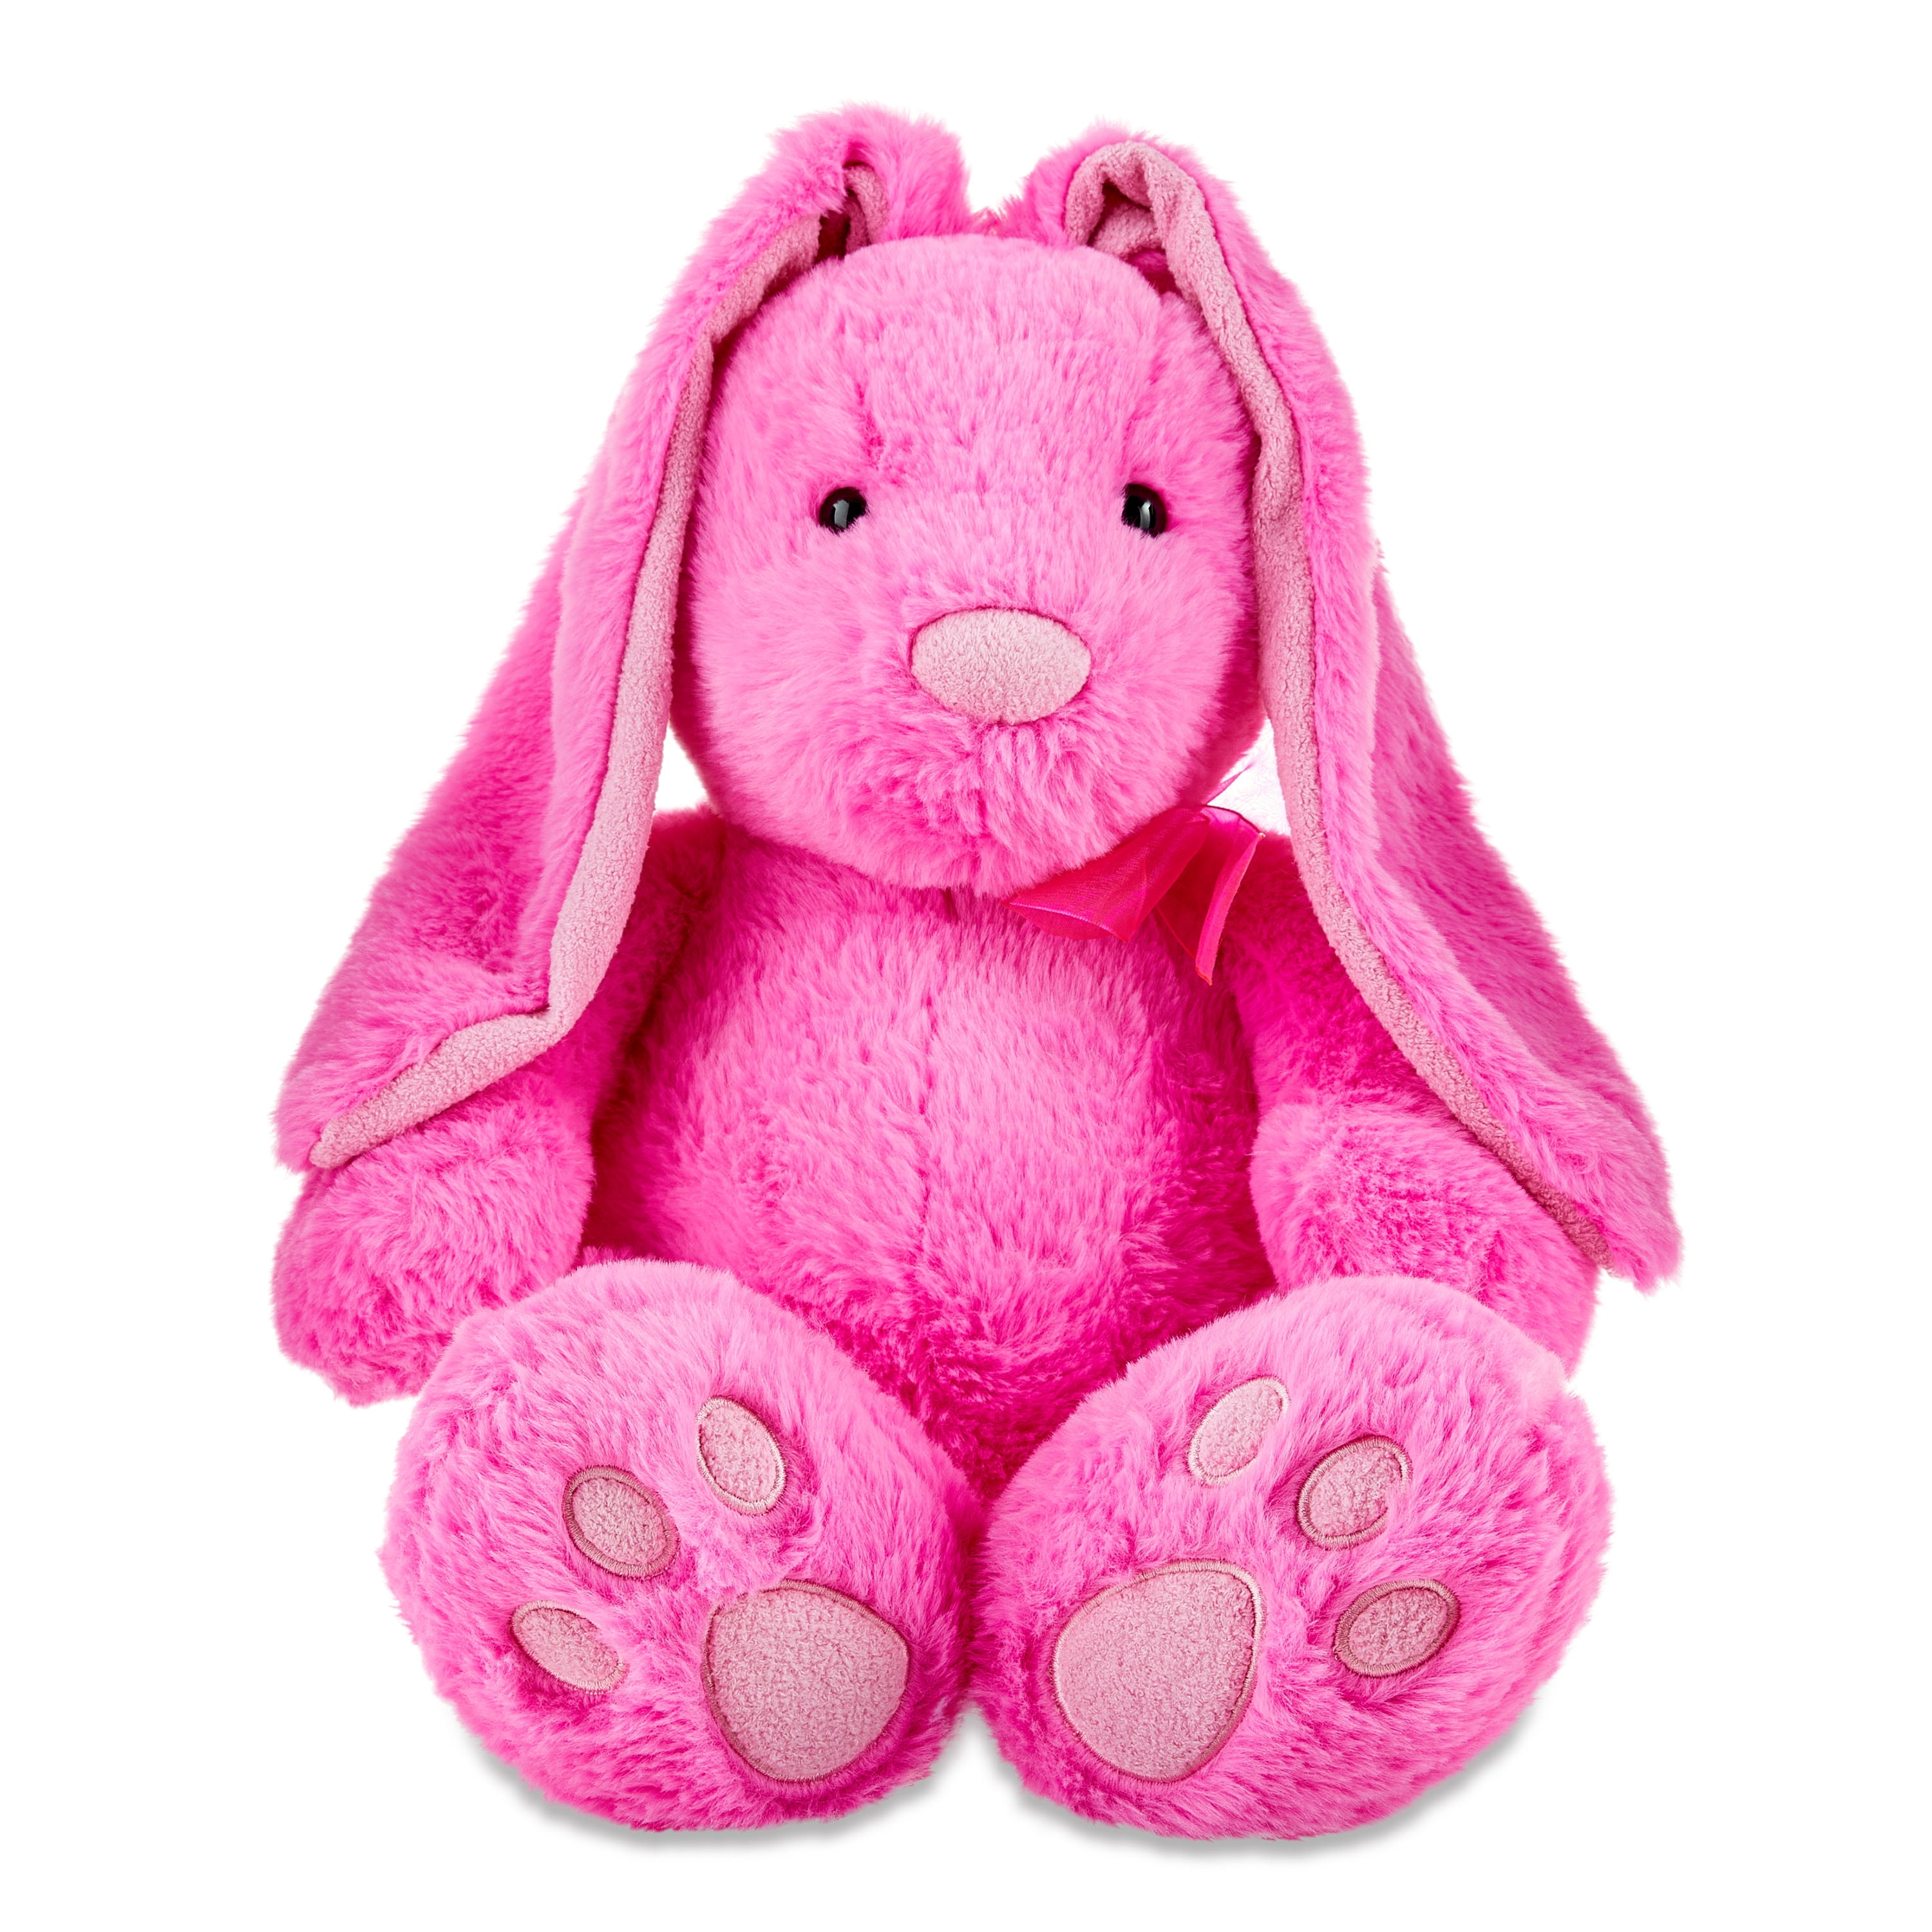 Easter Large Pink Long Ear Bunny Plush, 21 in, by Way To Celebrate